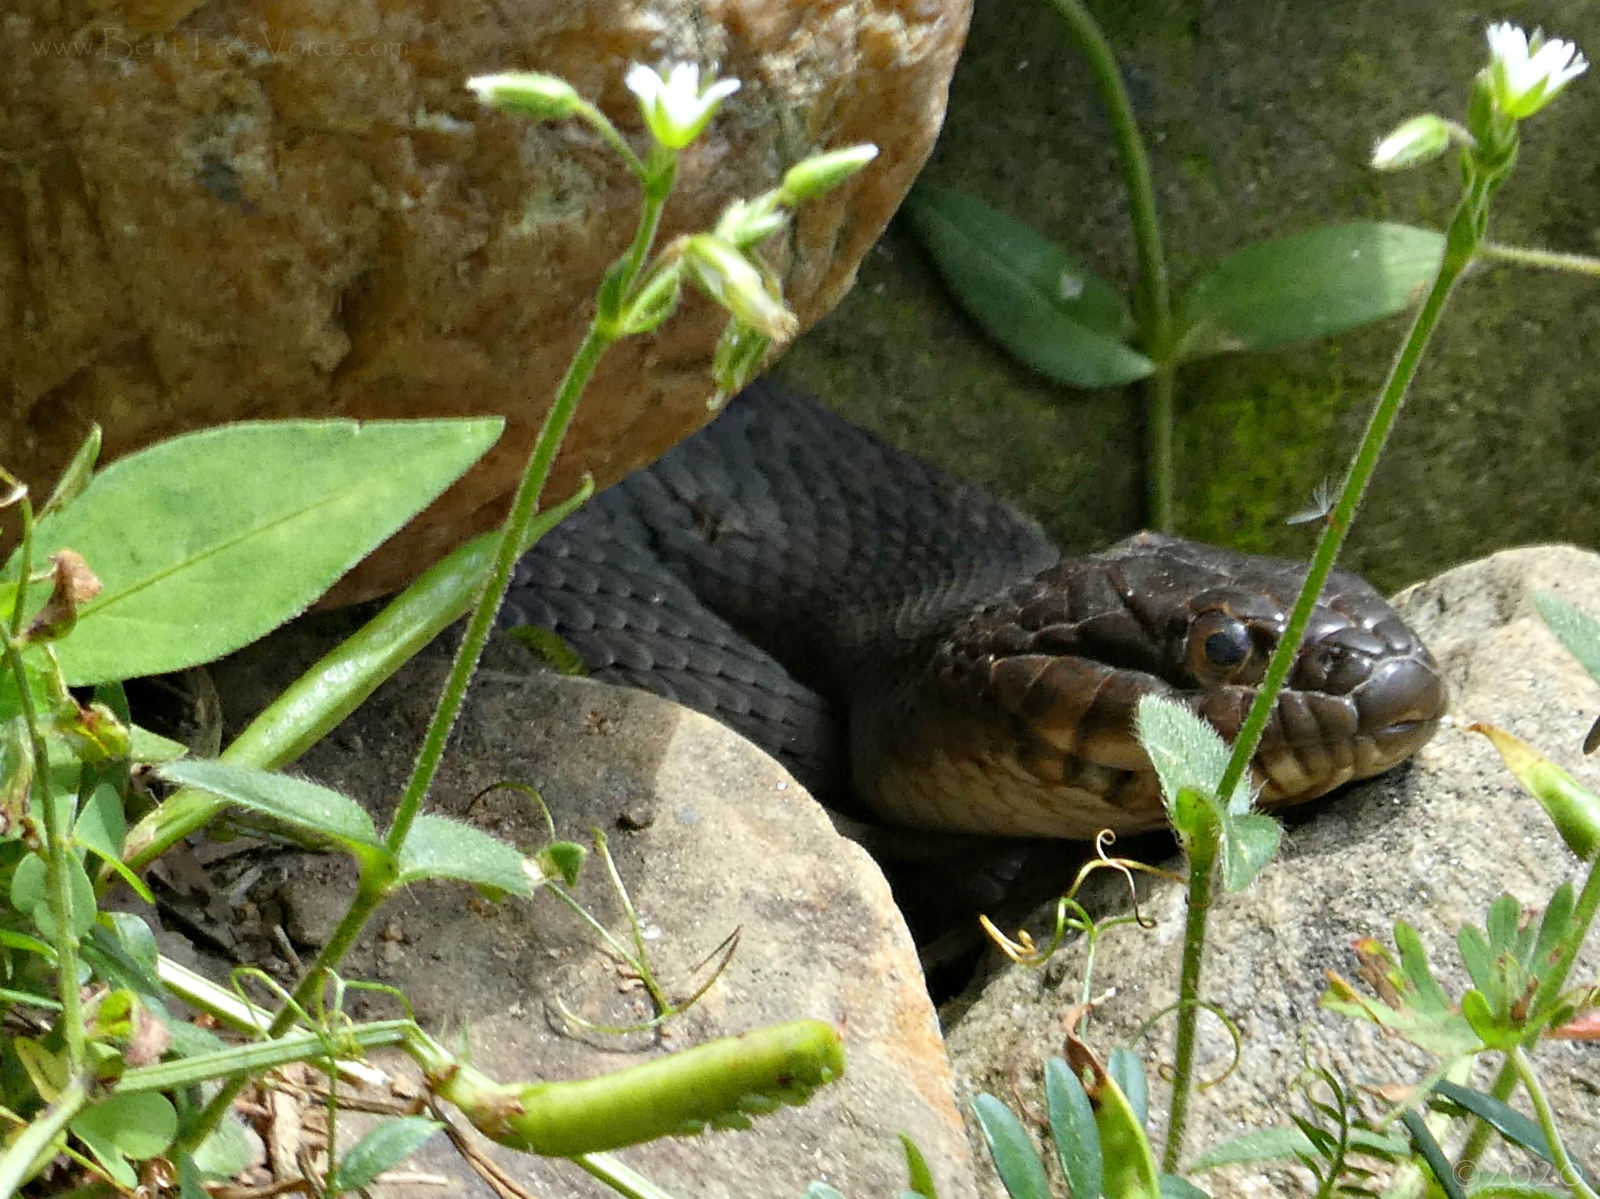 May 4, 2020 - Non-venomous water snake in Bent Tree